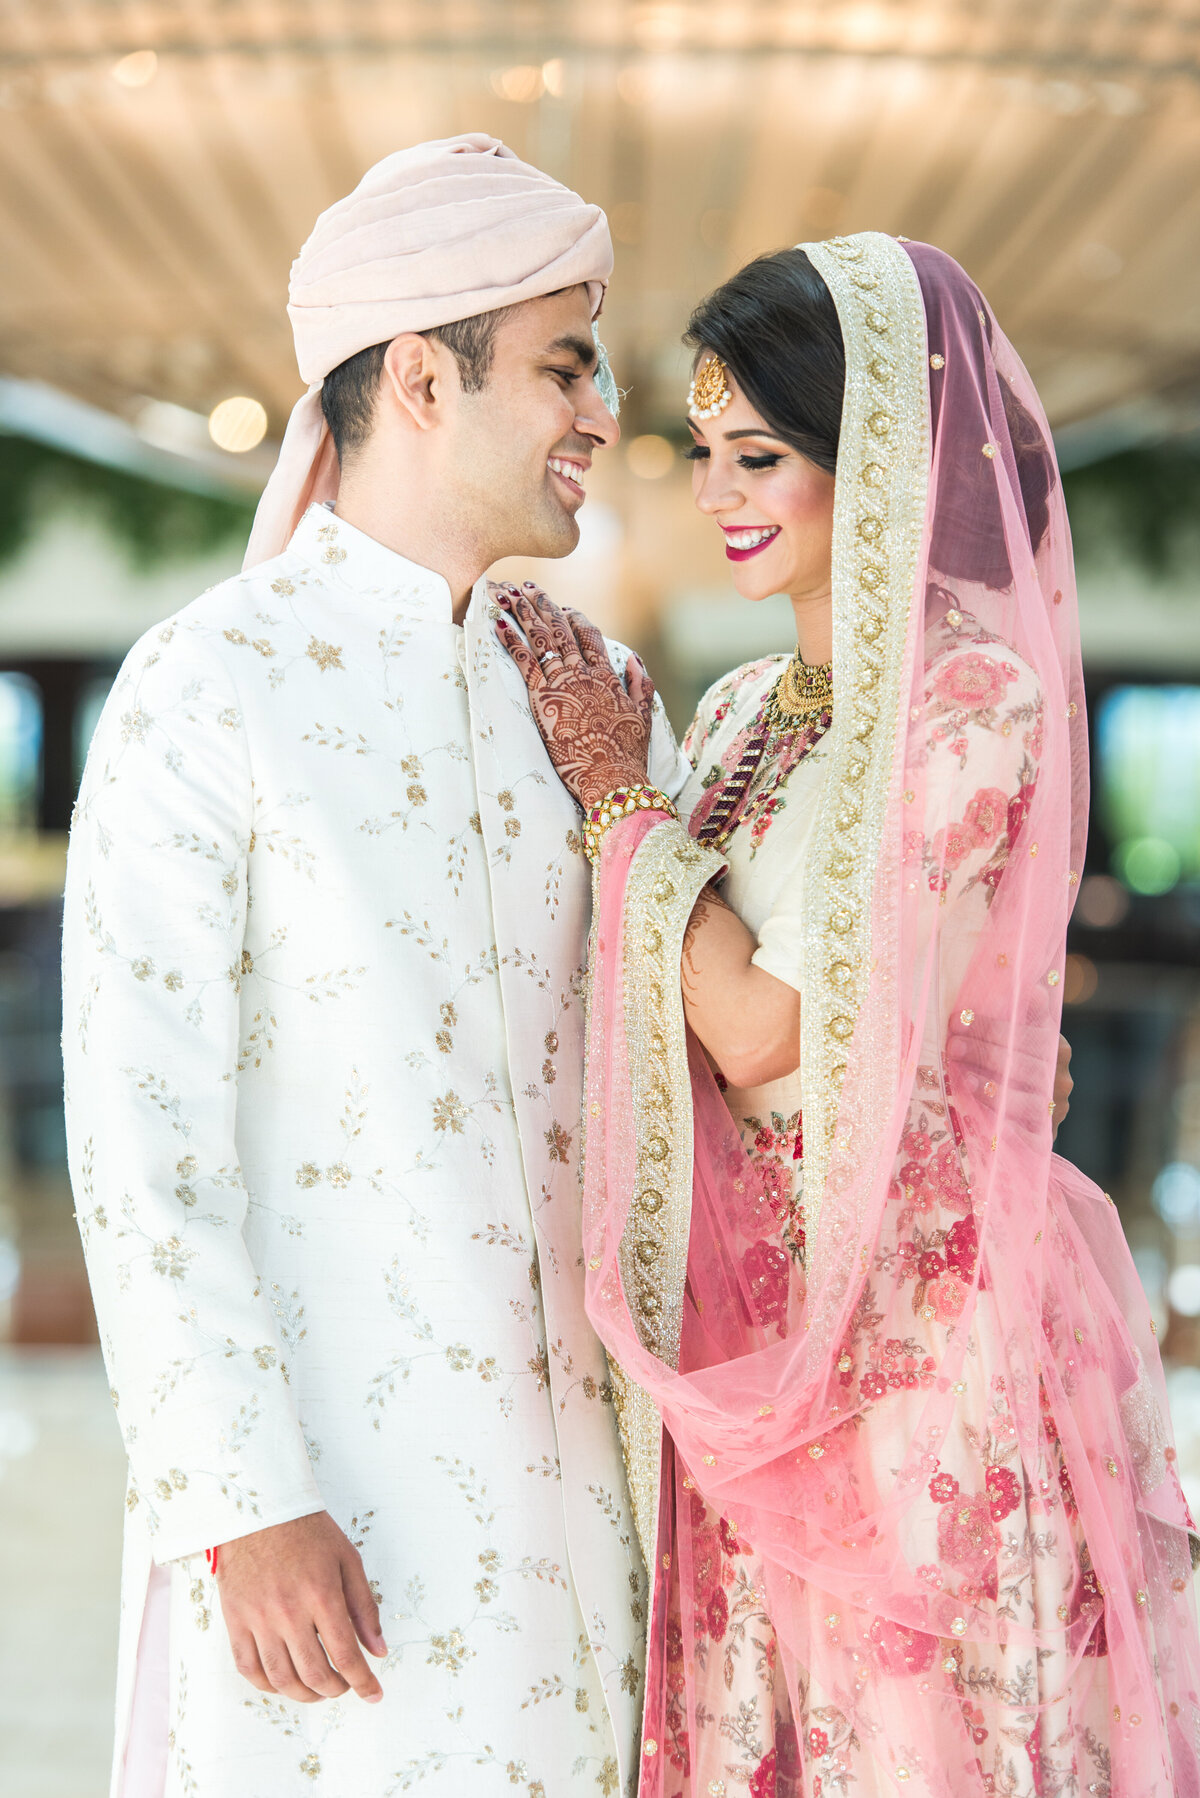 Maha Studios Wedding Photography Chicago New York California Sophisticated and vibrant photography honoring modern South Asian and multicultural weddings2